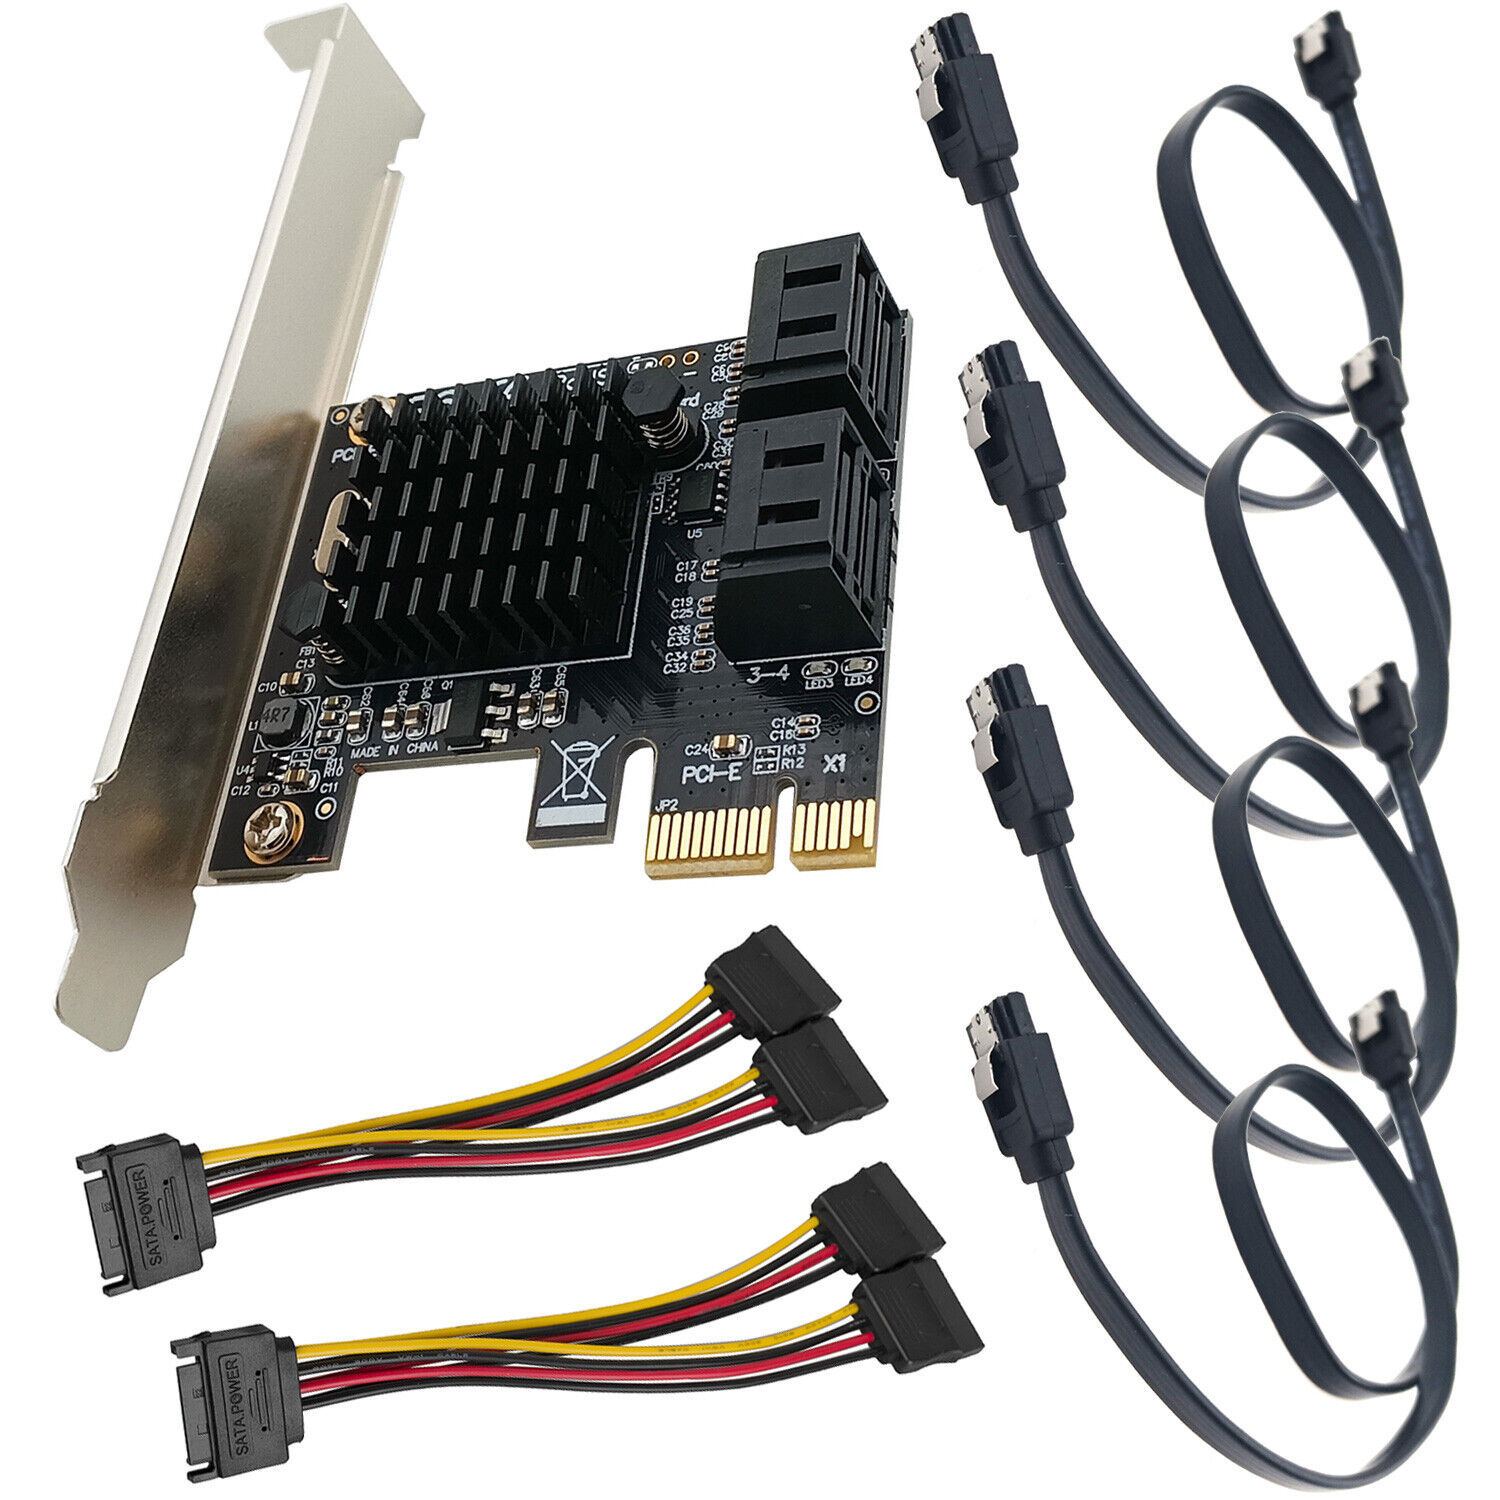 PCI-e X1 to SATA III 4 Port Expansion Adapter Desktop PC Data Power Cable Kit